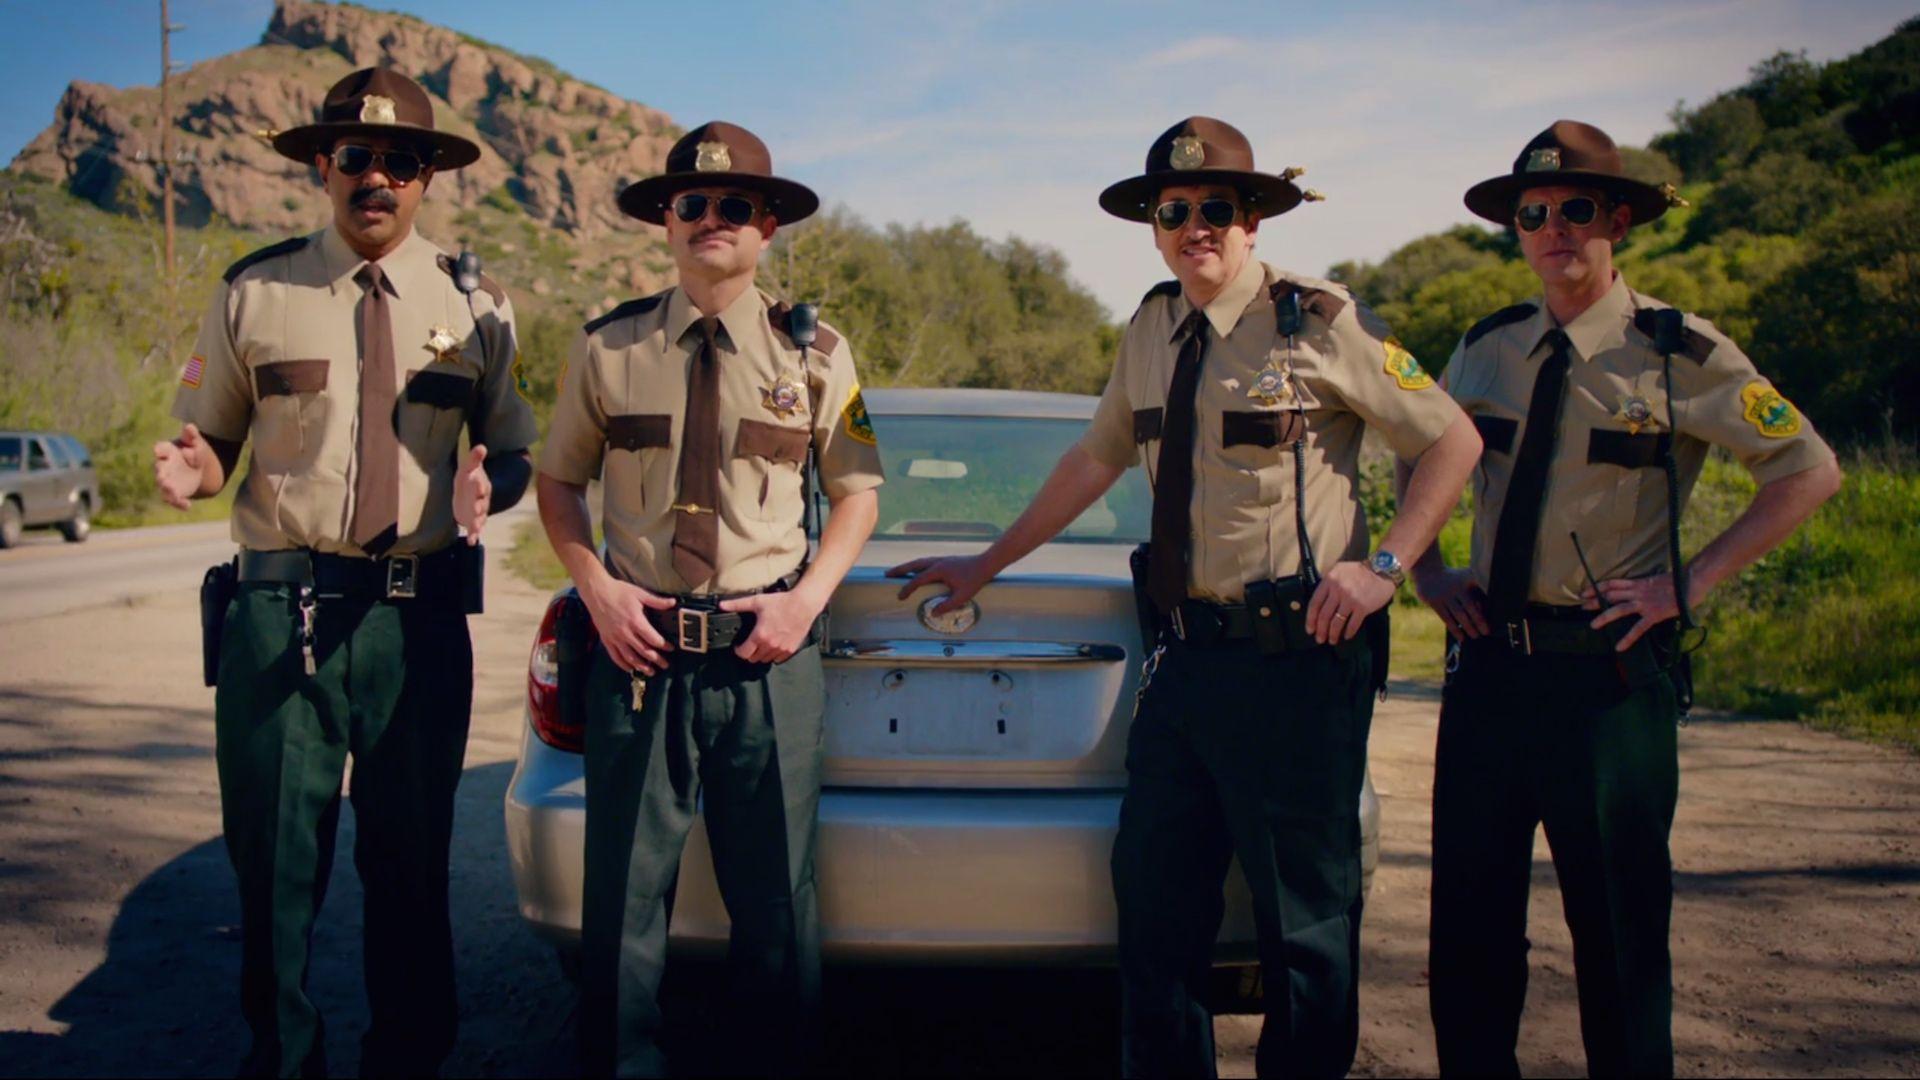 FLOOD. “The Time Is Meow”: “Super Troopers 2” Begins Filming